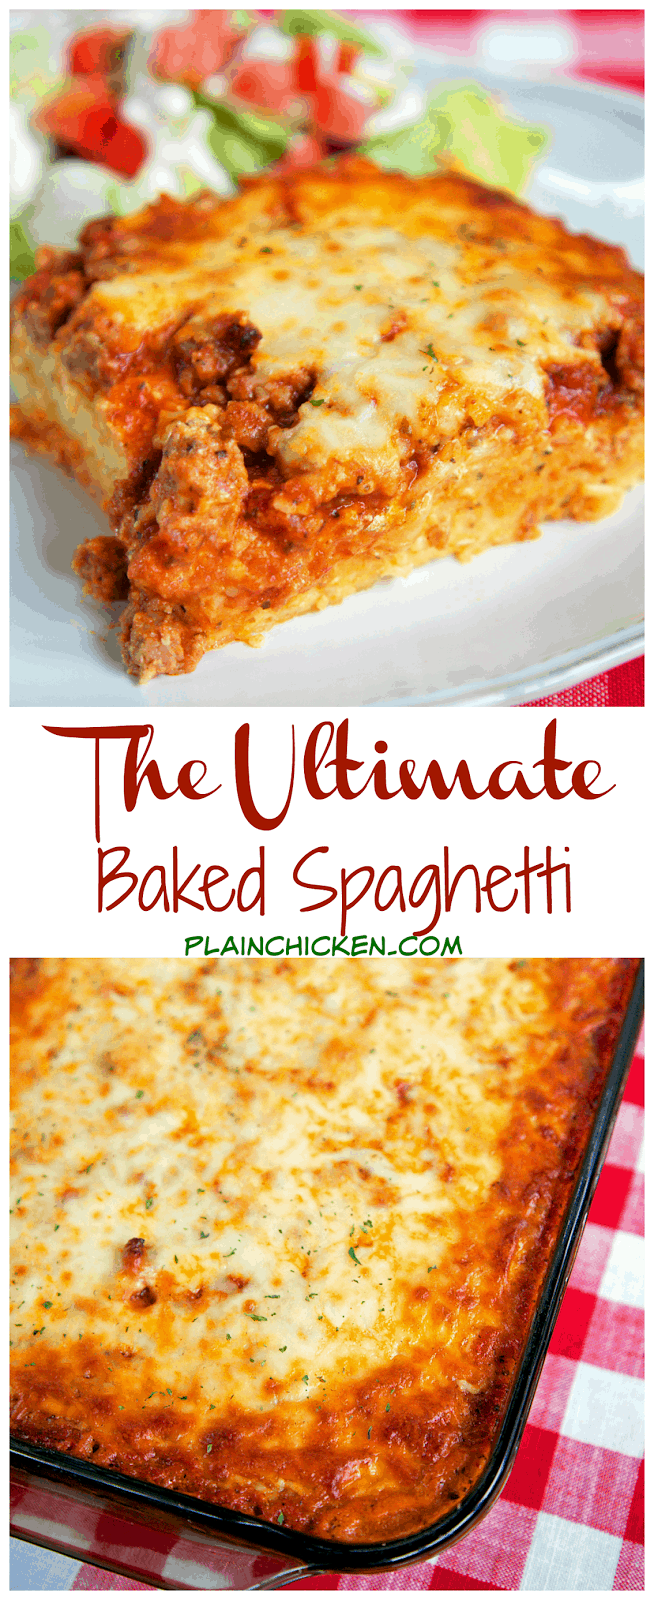 The Ultimate Baked Spaghetti - cheesy spaghetti topped with Italian seasoned cream cheese, meat sauce and mozzarella cheese - SOOOO good! Makes a great freezer meal too! We ate this two days in a row!